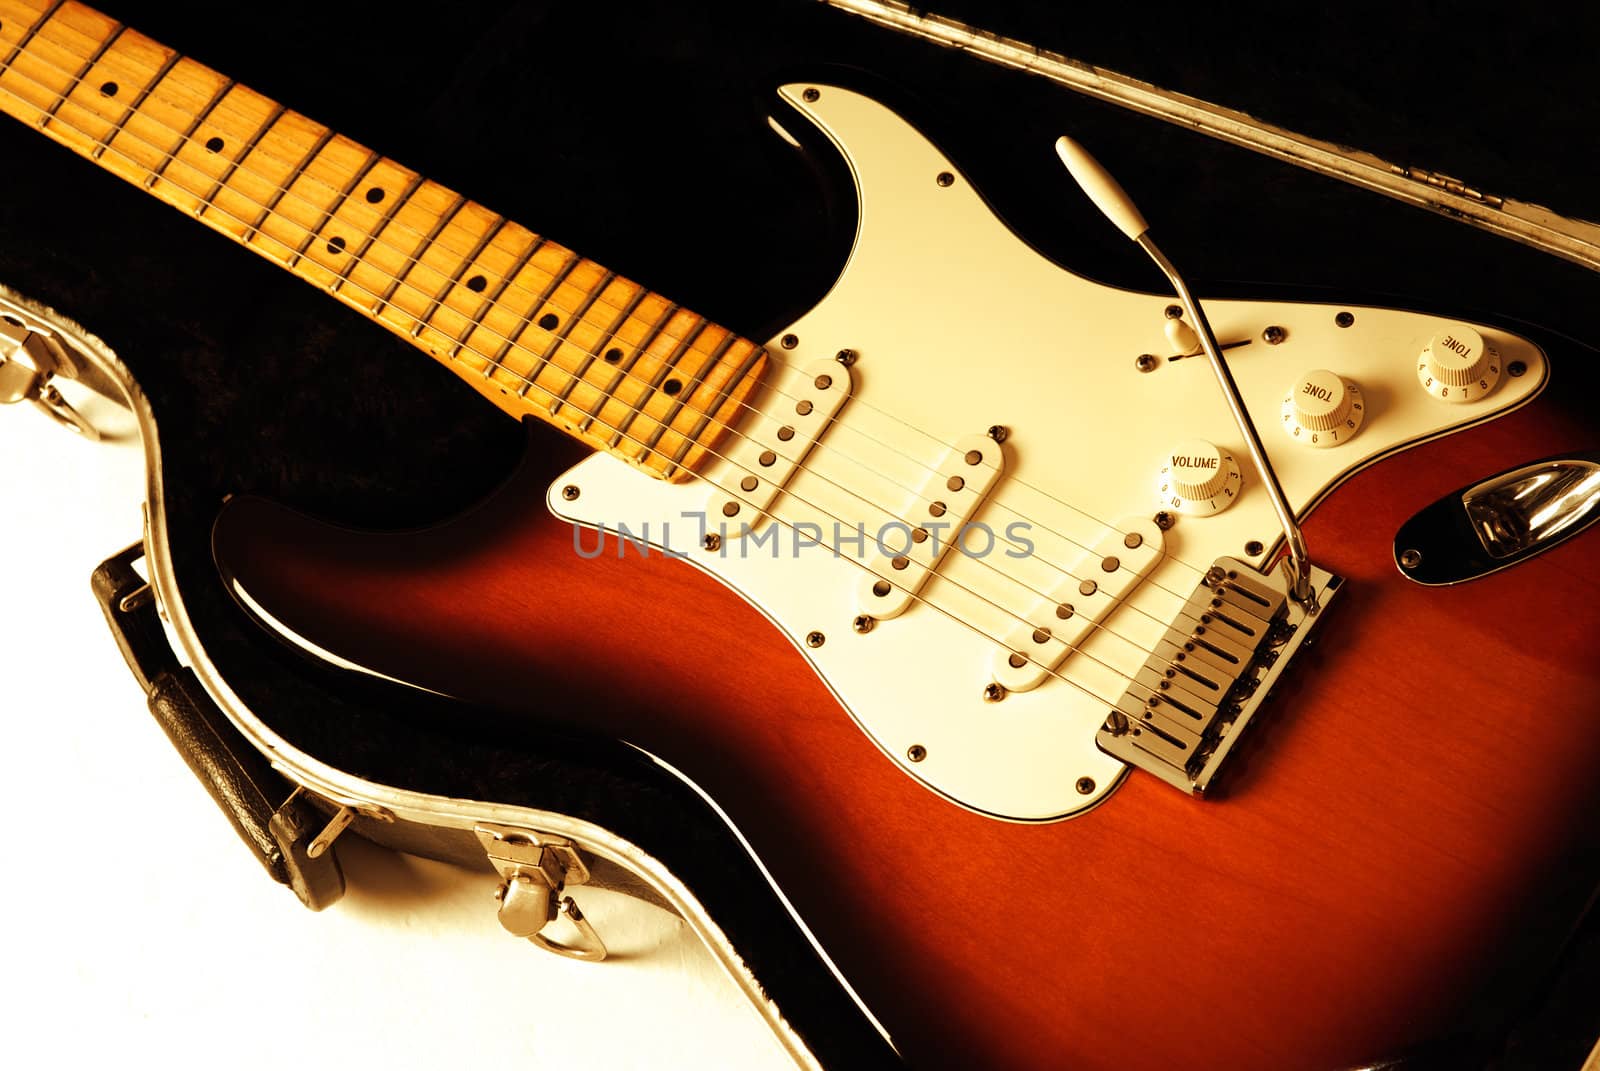 Electric guitar on case with orange lighting. 